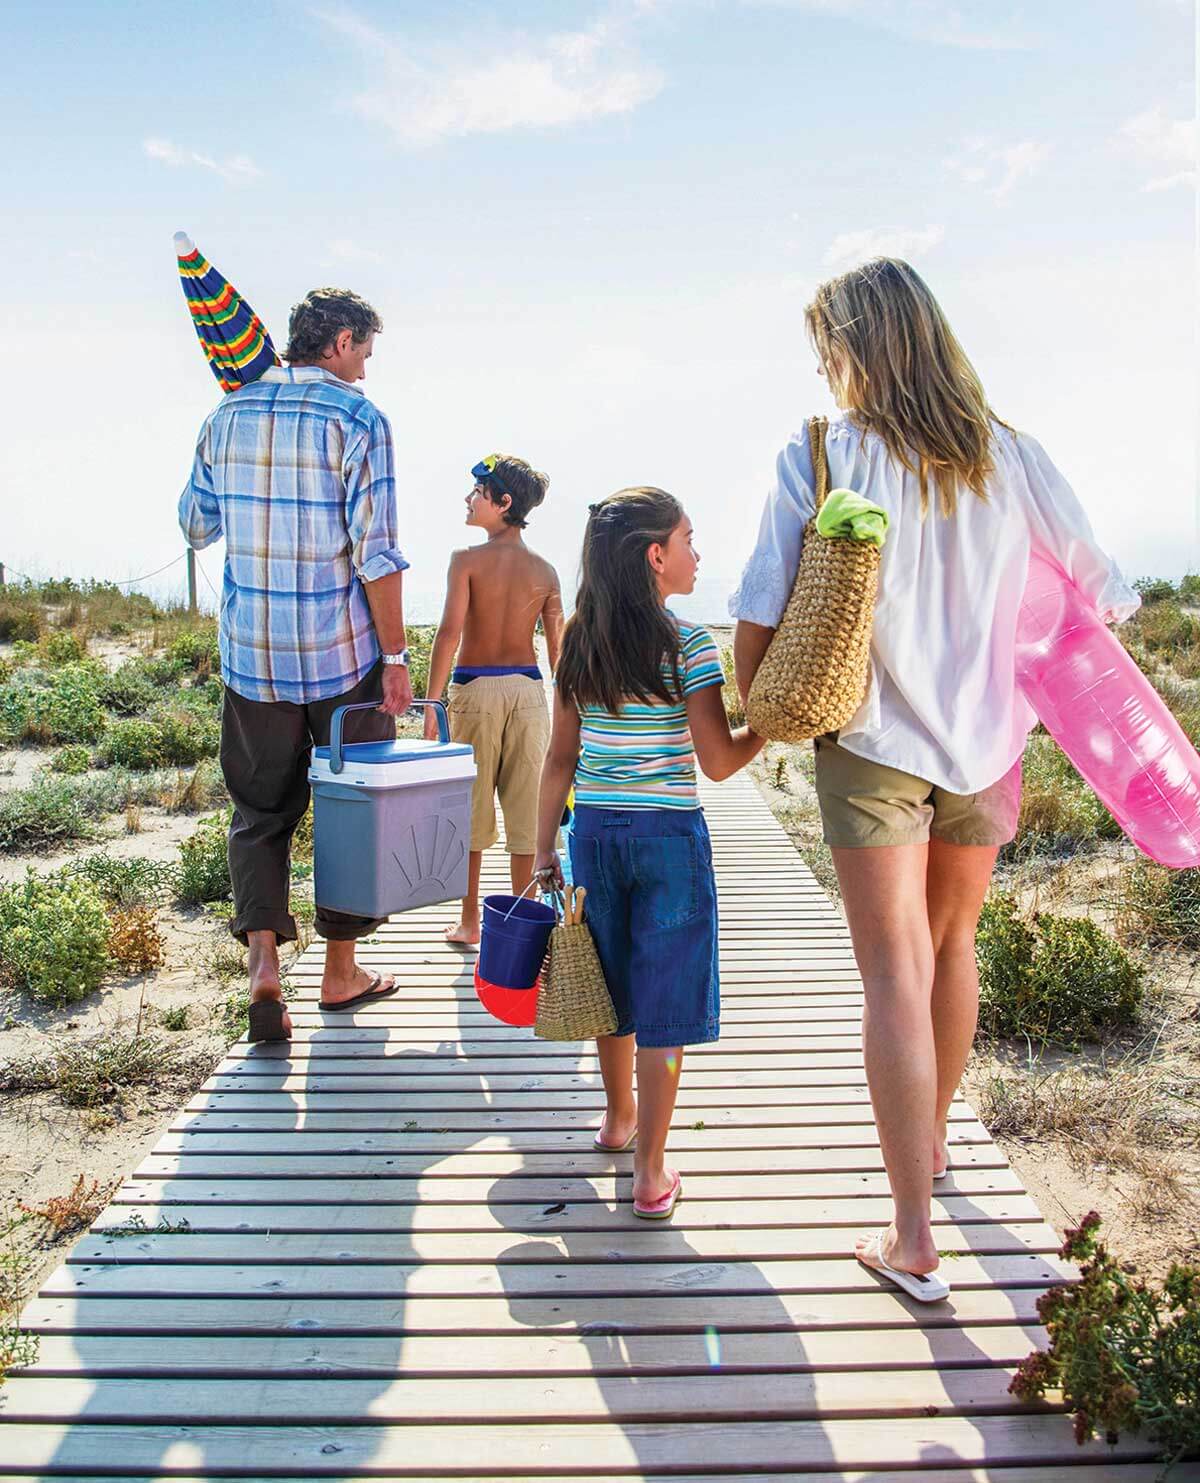 Summer travel dreams: Five tips to have a successful vacation with young kids